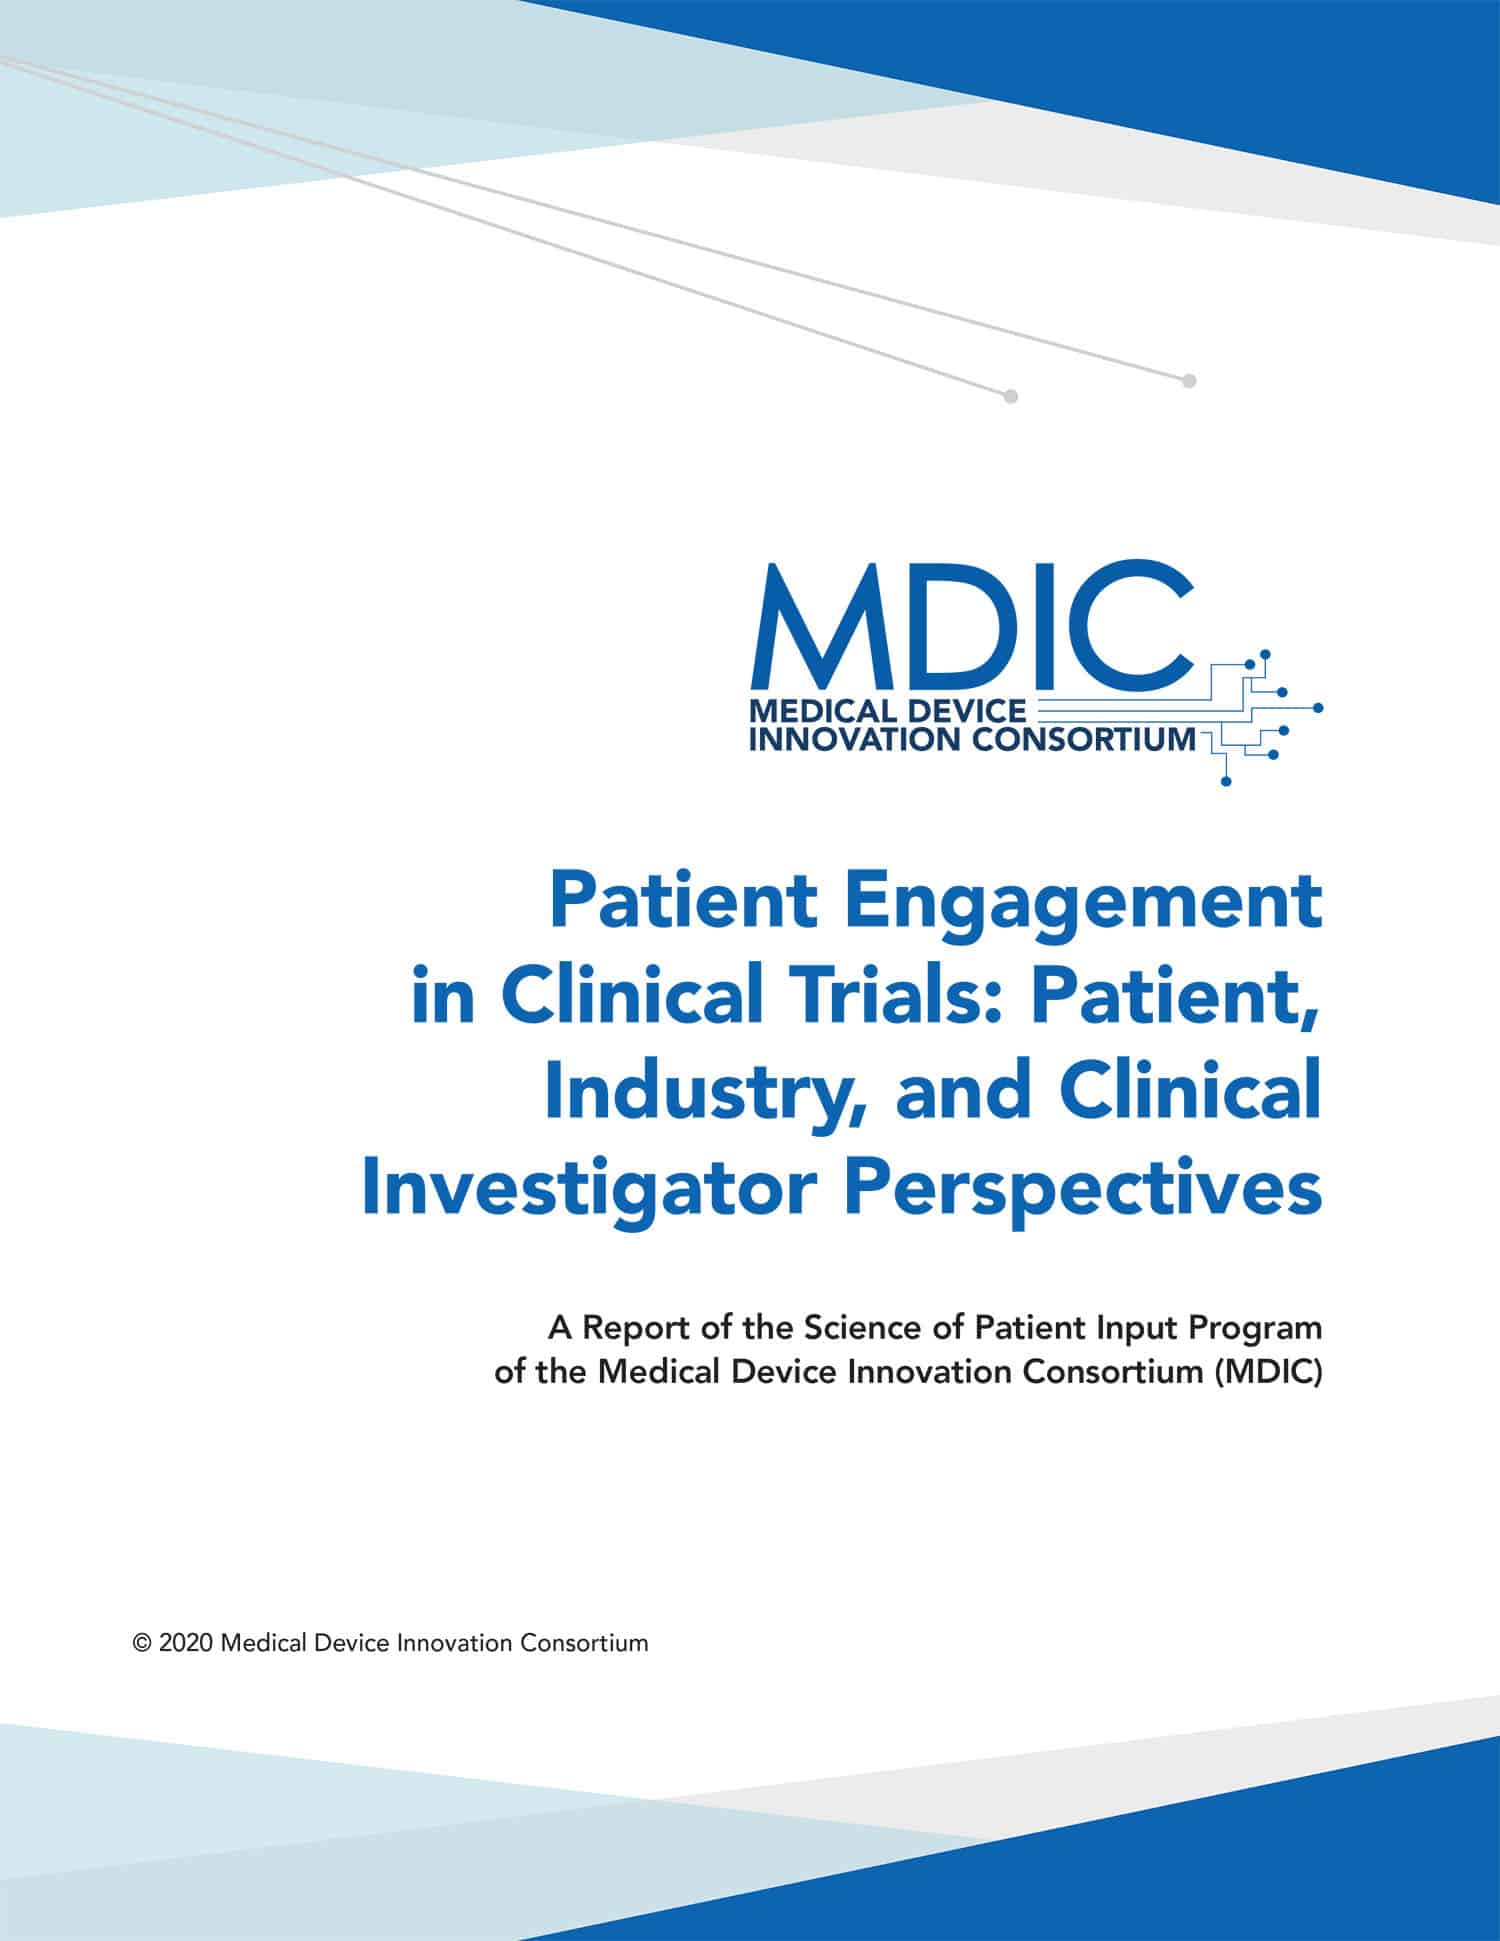 MDIC’S Combined Survey Report: Patient Engagement in Clinical Trials: Patient, Industry, and Clinical Investigator Perspectives